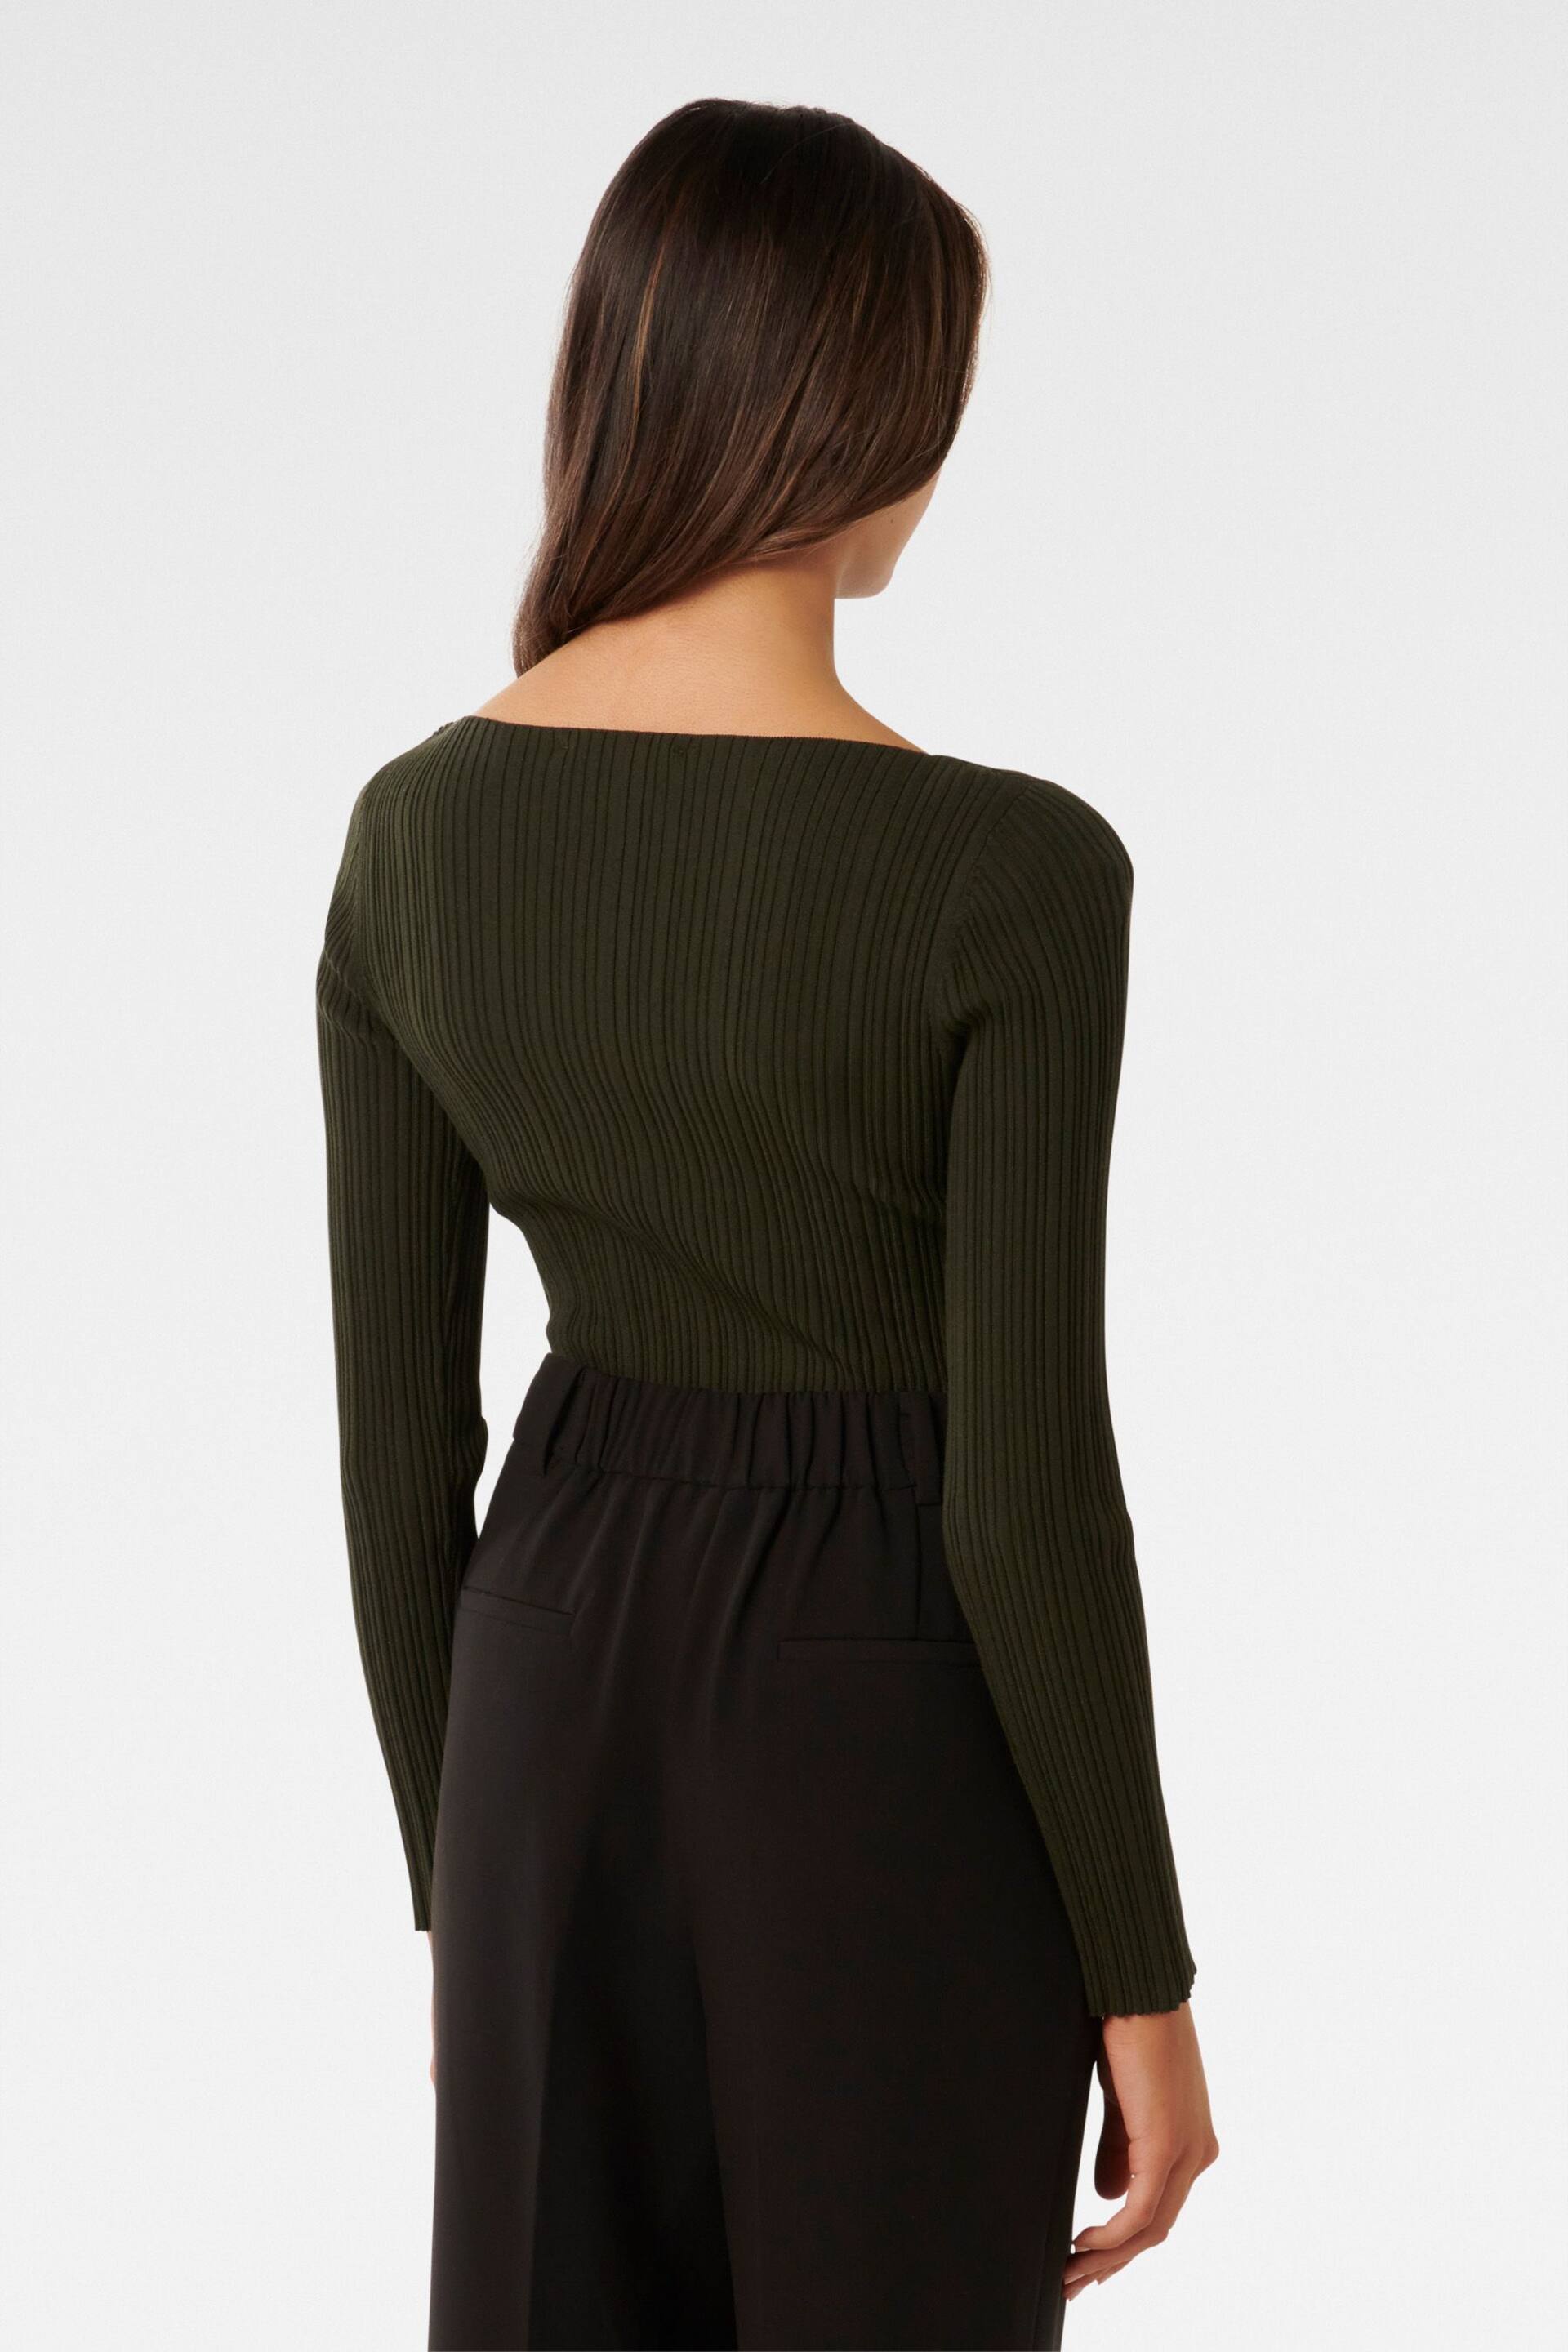 Forever New Green Evie Petite Long Sleeve Rib Knit Top - Image 2 of 5